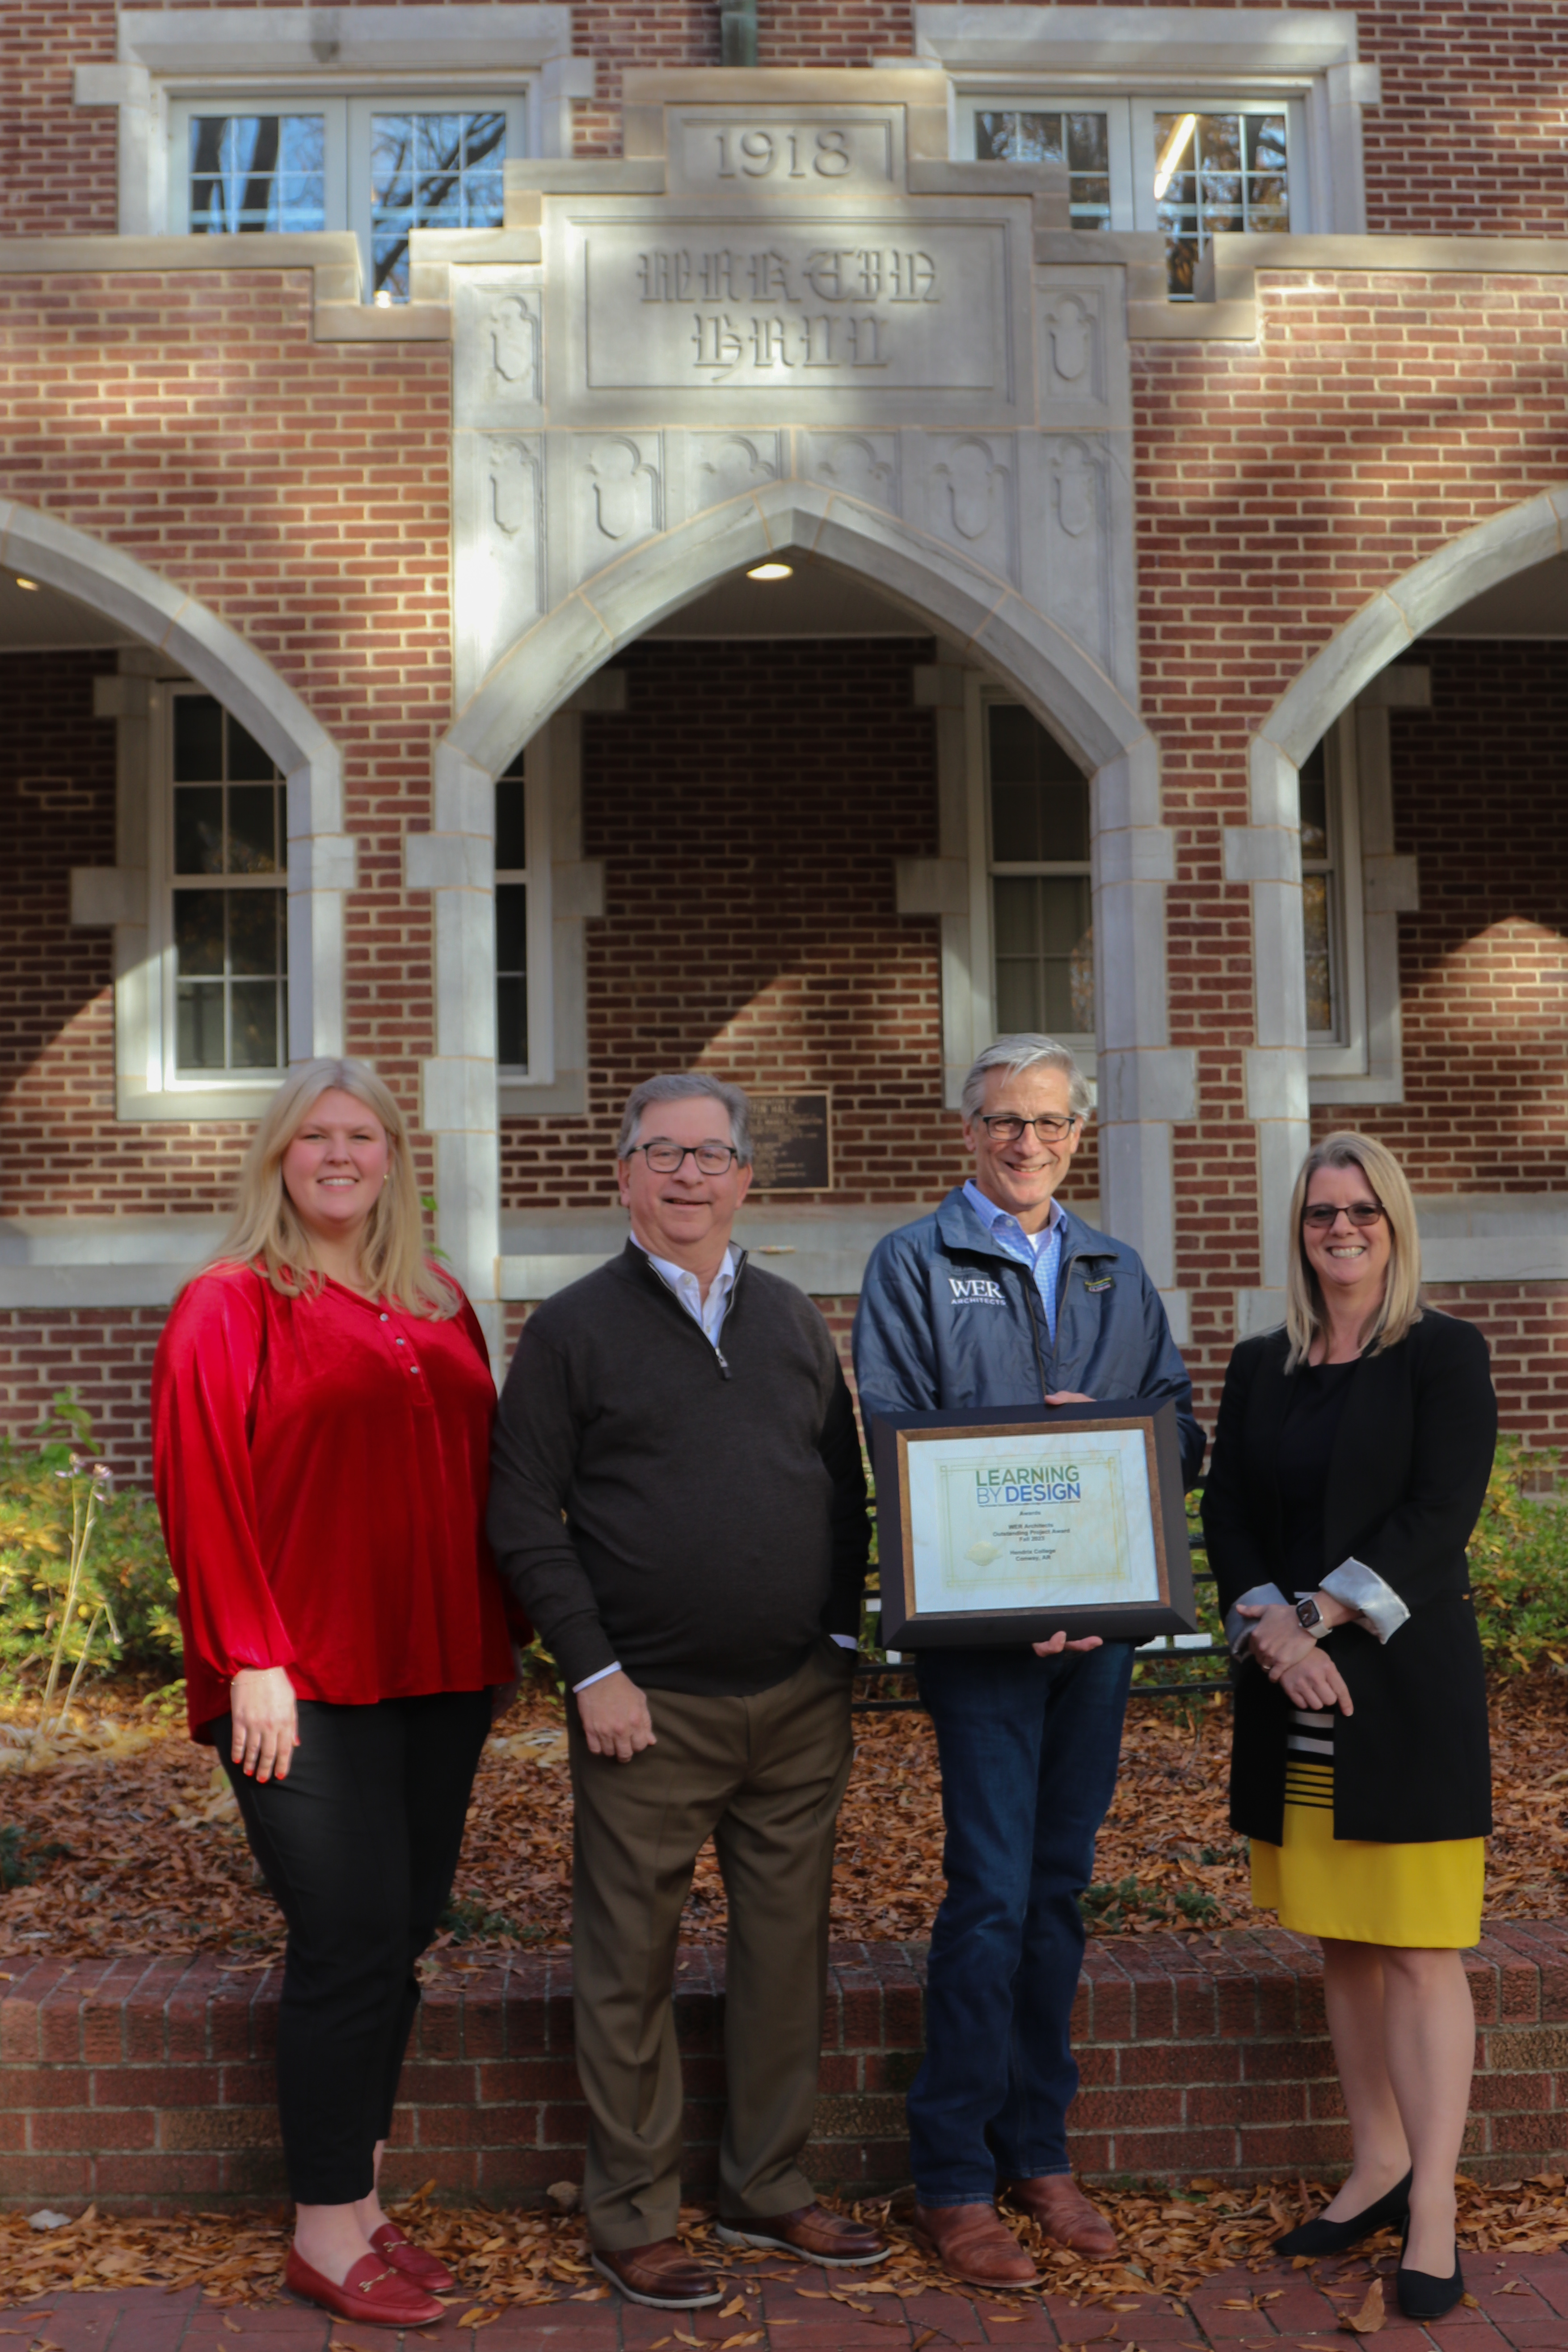 Leaders from Hendrix College and WER Architects gathered on December 12 to celebrate the state and national honors that recent residence hall renovation projects have received. From left: Greer Veon, Hendrix College Director of Residential Life; Ellis Arnold, President Emeritus of the College; John Greer, Principal, WER Architects; and Karen Petersen, President of the College.